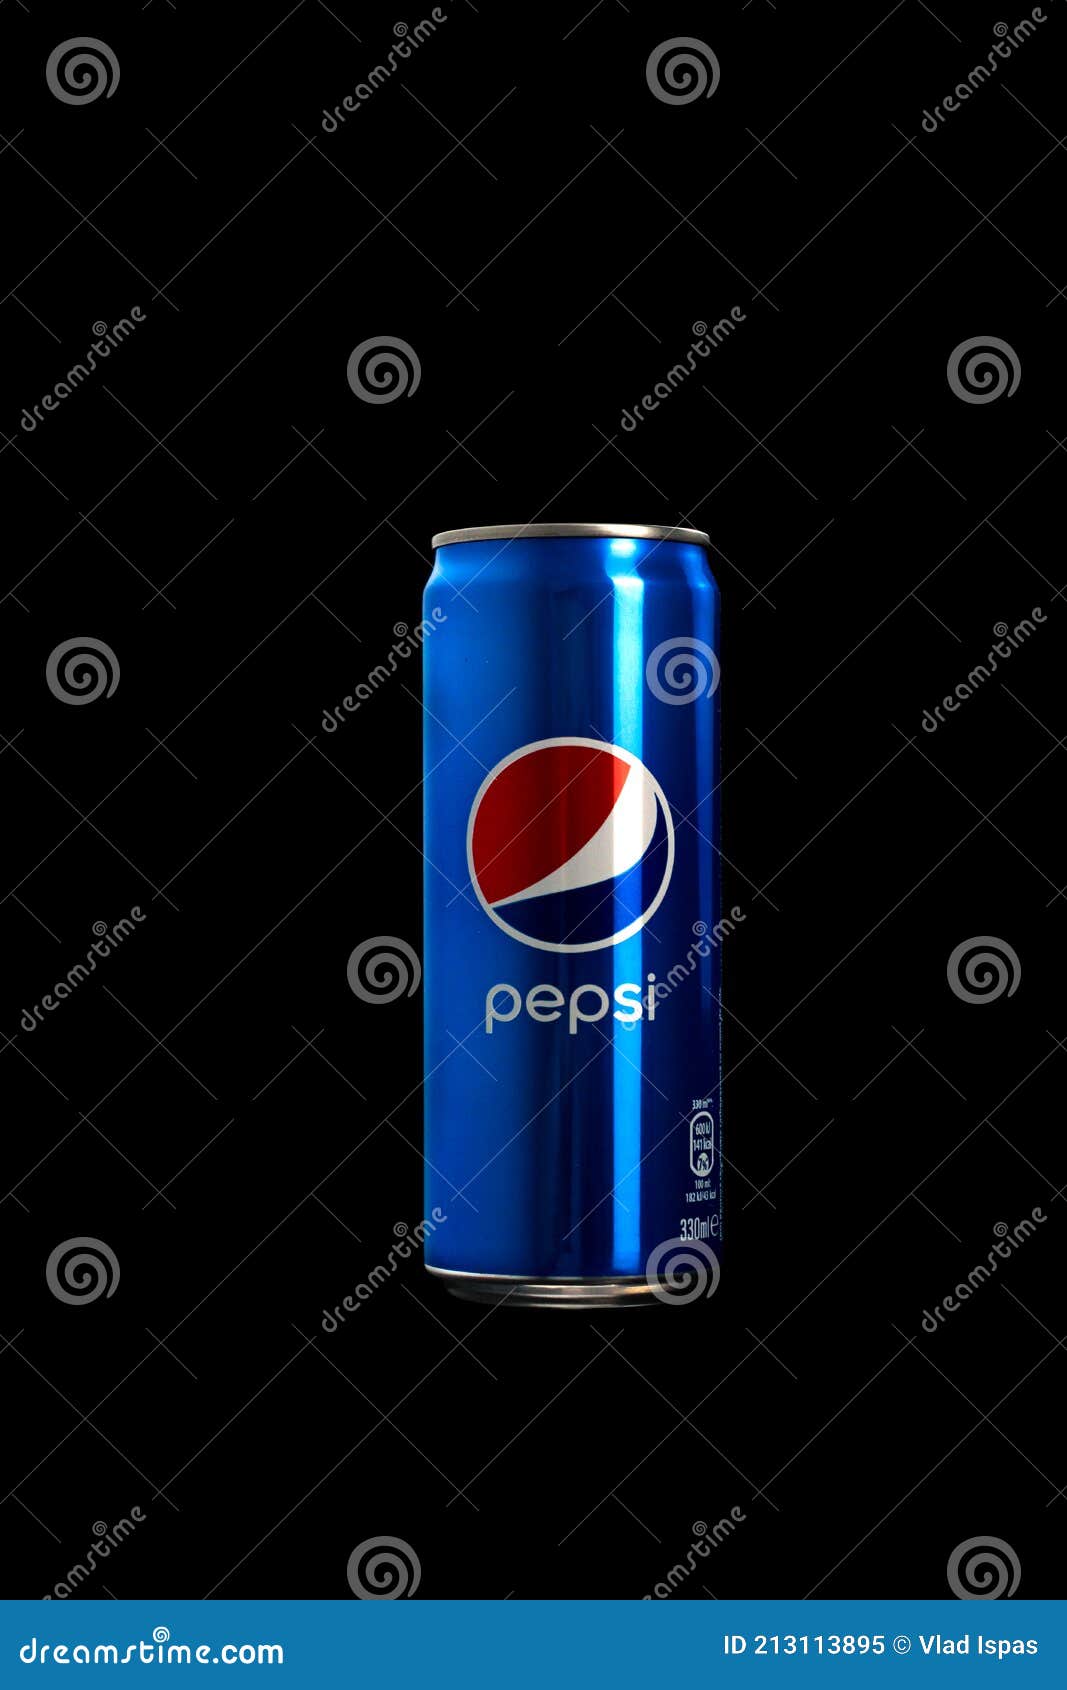 Editorial Photo of Classic Pepsi Can on Black Background. Studio Shot ...